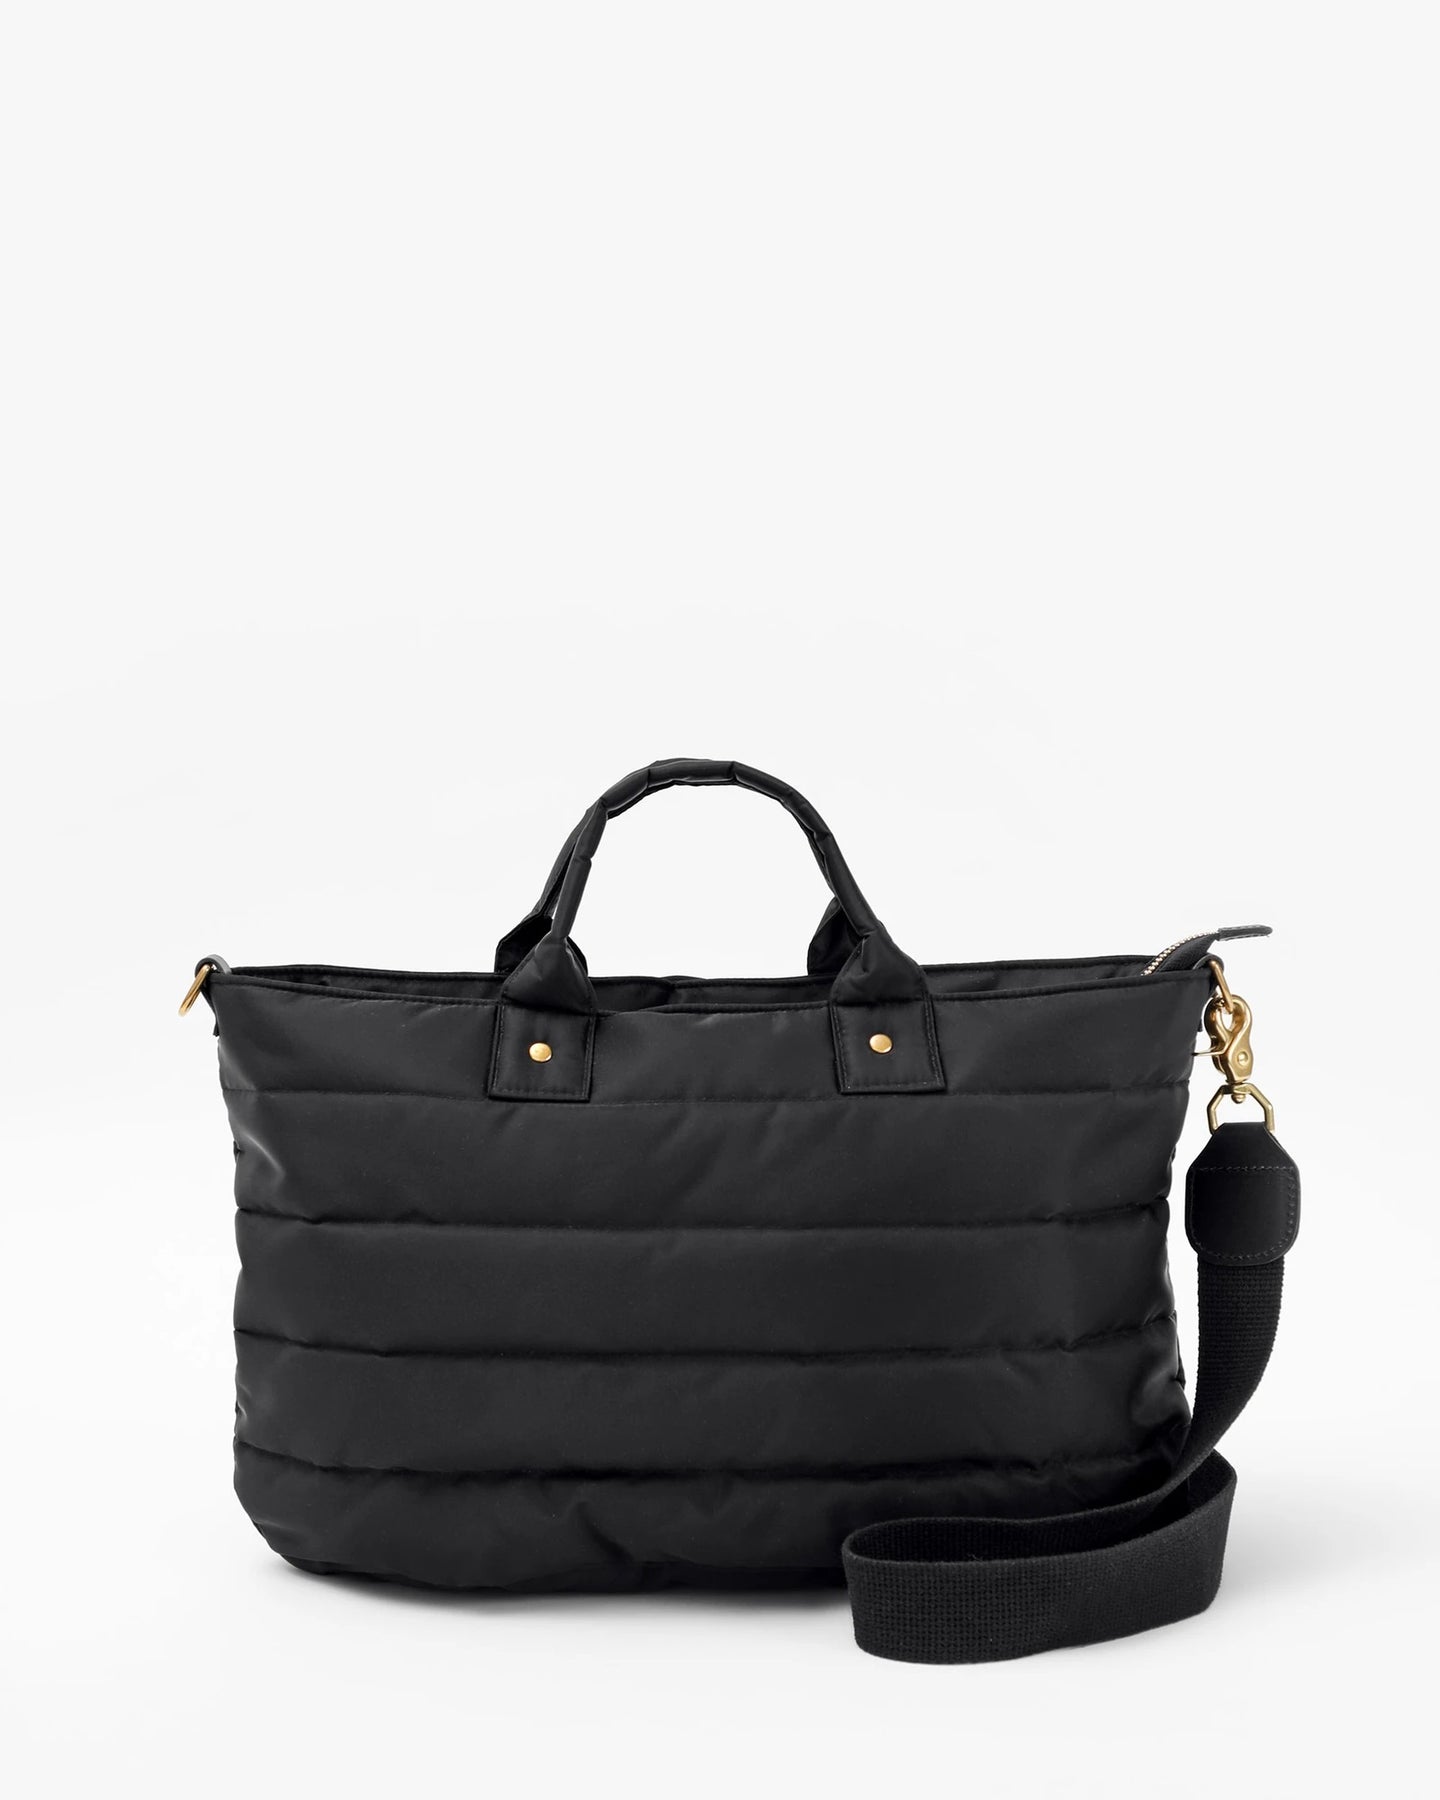 Clare V. Quilted Nylon Tote - Black Totes, Handbags - W2434326